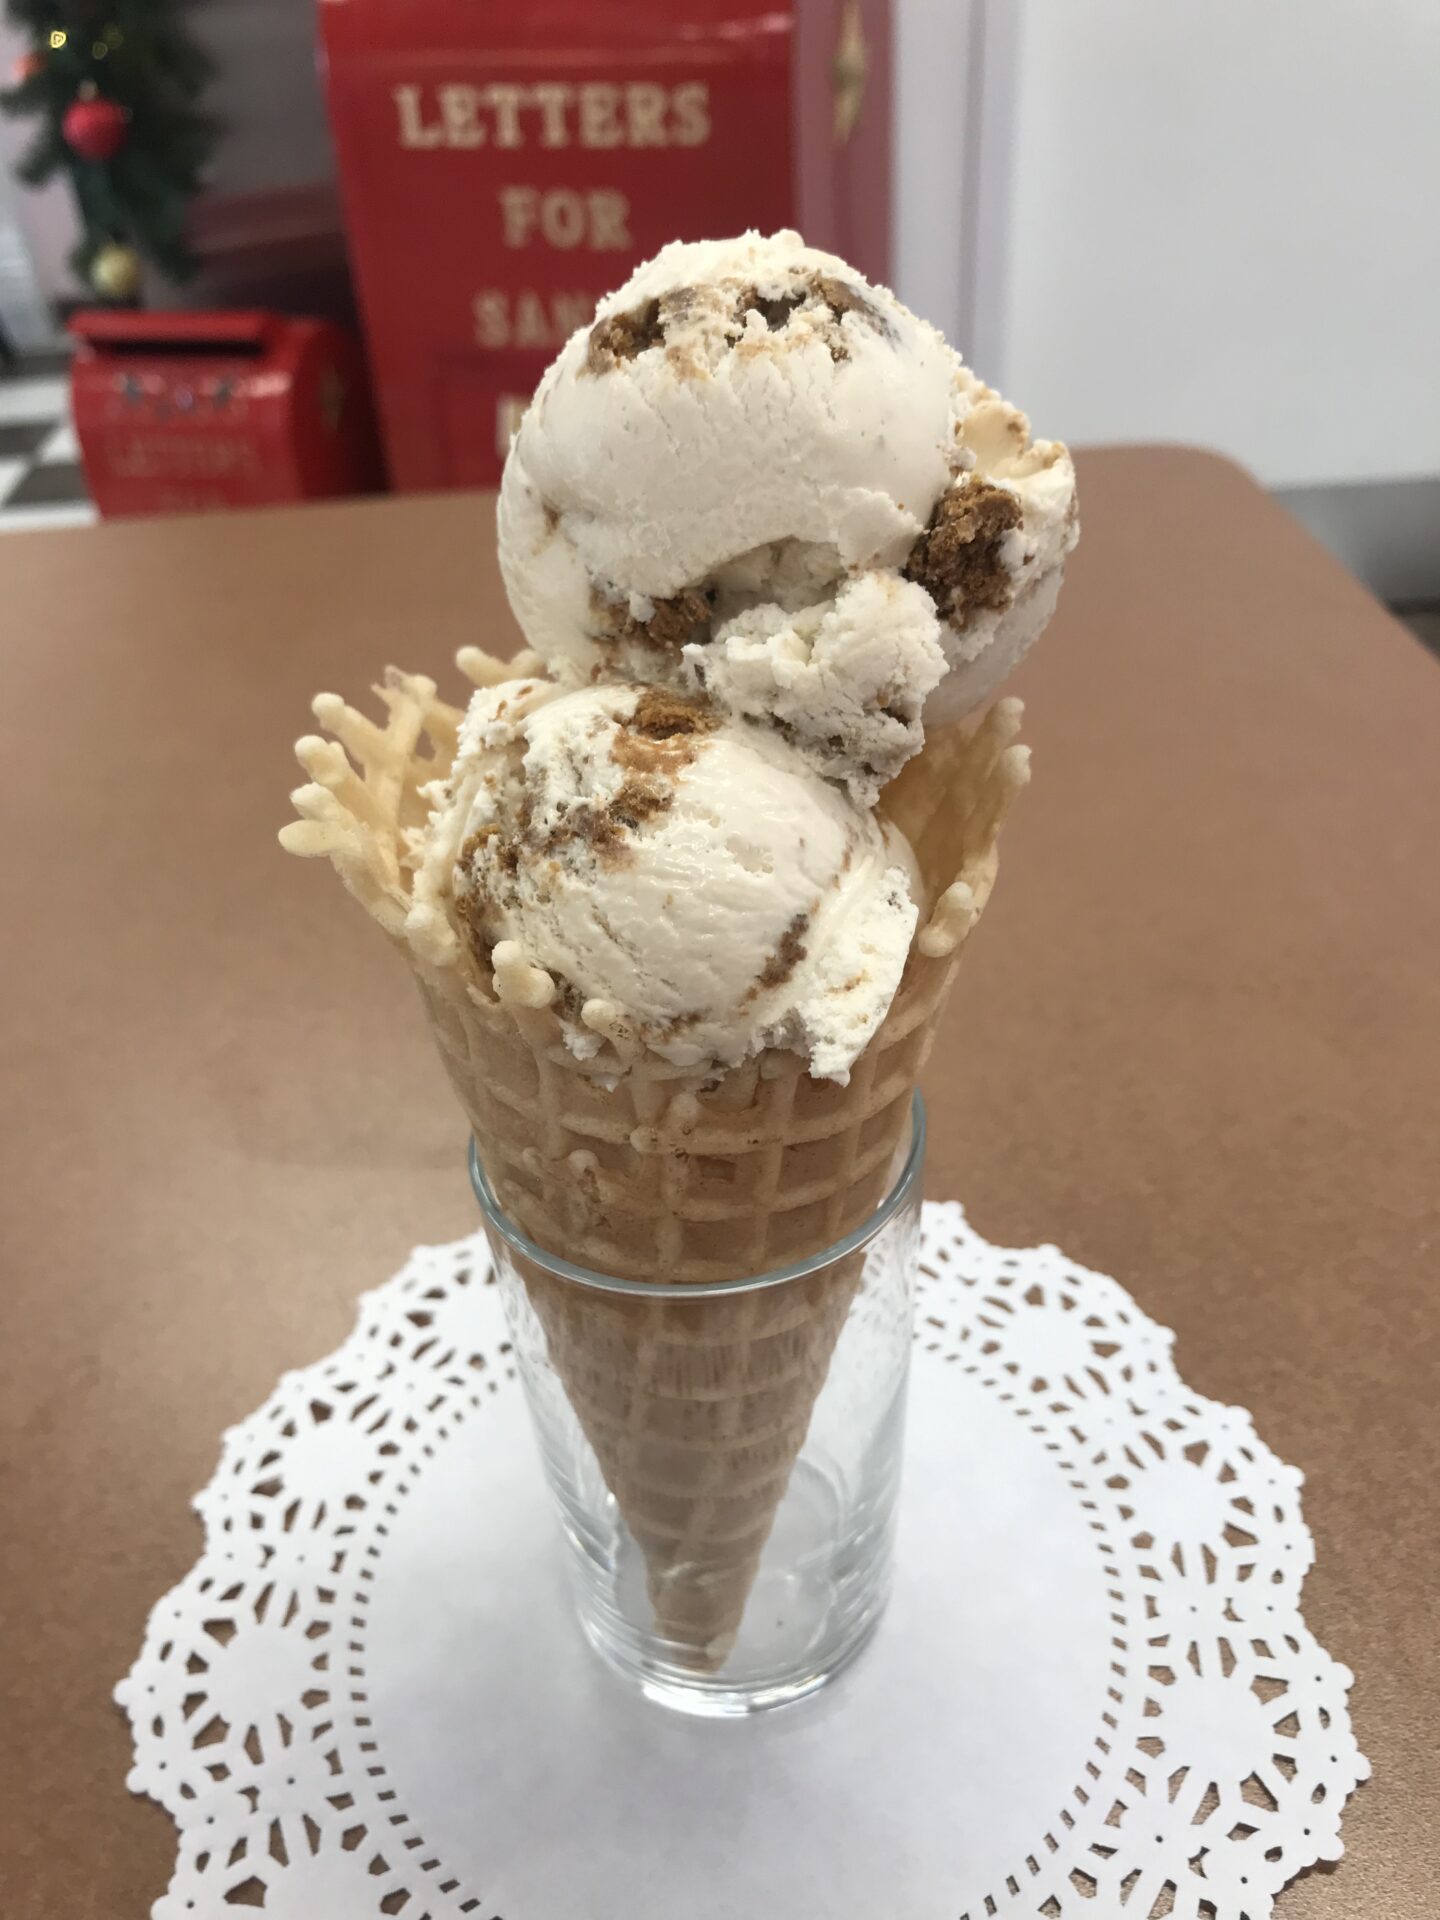 The tipsy gingerbread man ice cream